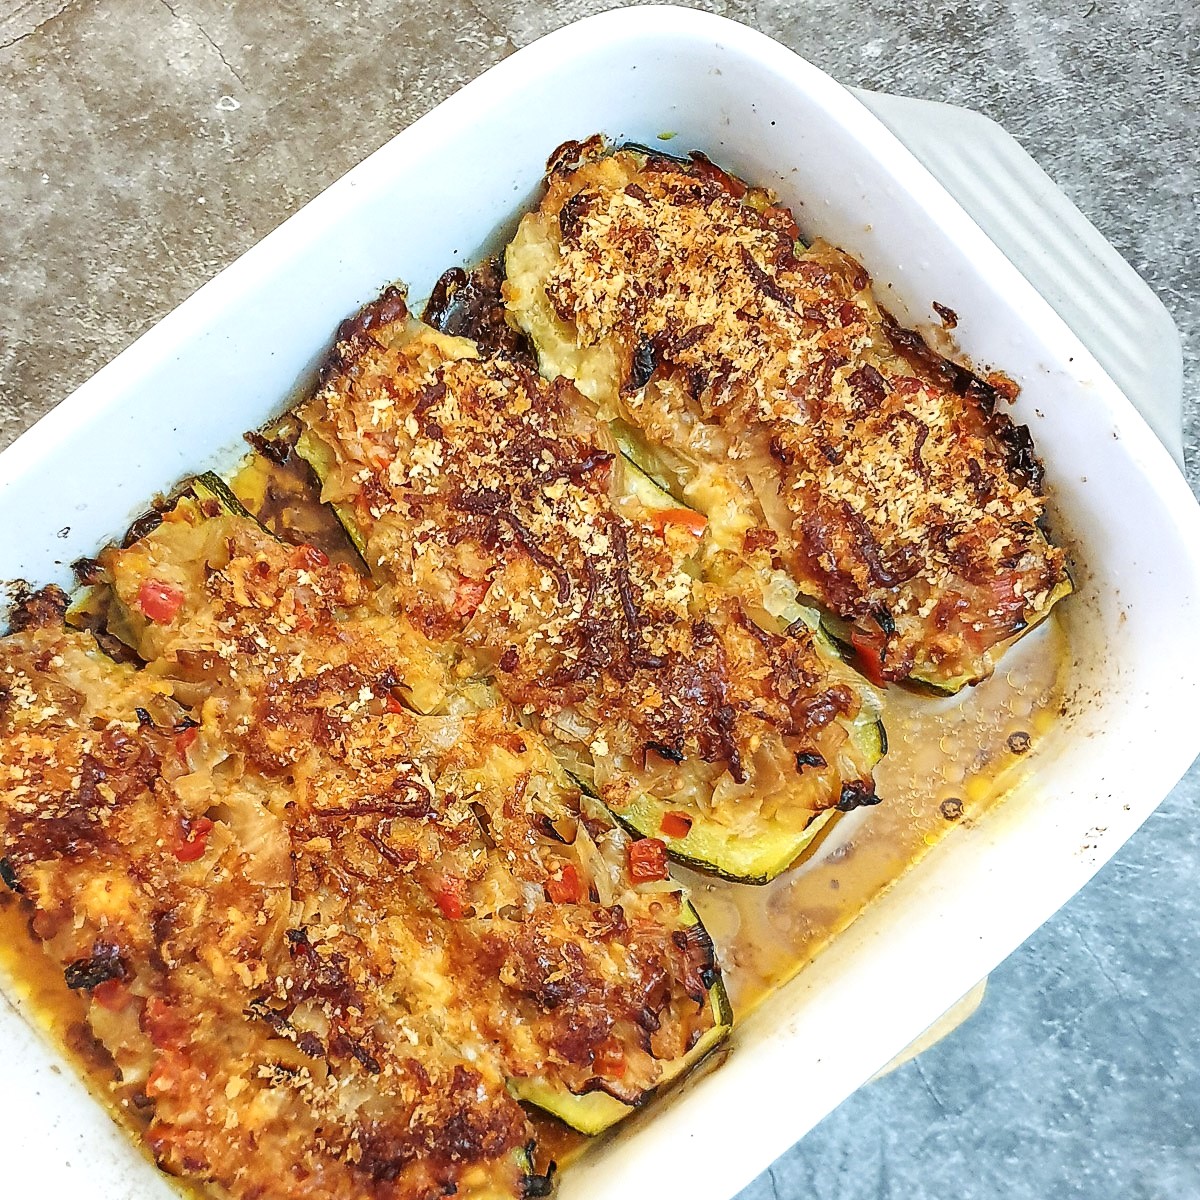 A baking dish containing 4 cabbage-stuffed courgettes.